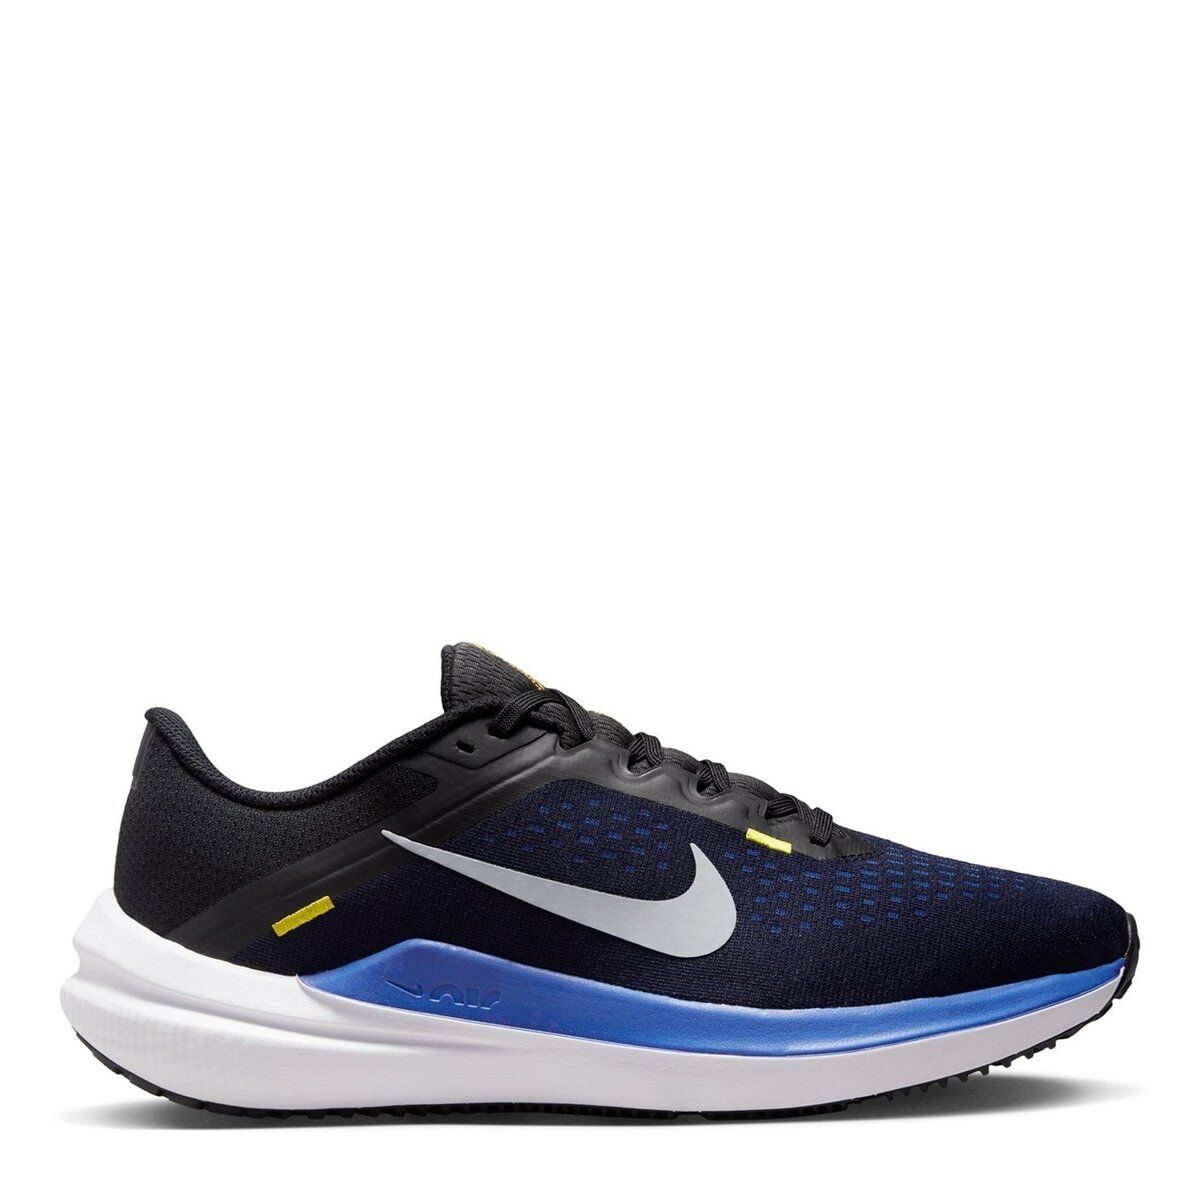 Nike Air Winflo 10 Mens Road Running Shoes - male - Black/Blue - 8